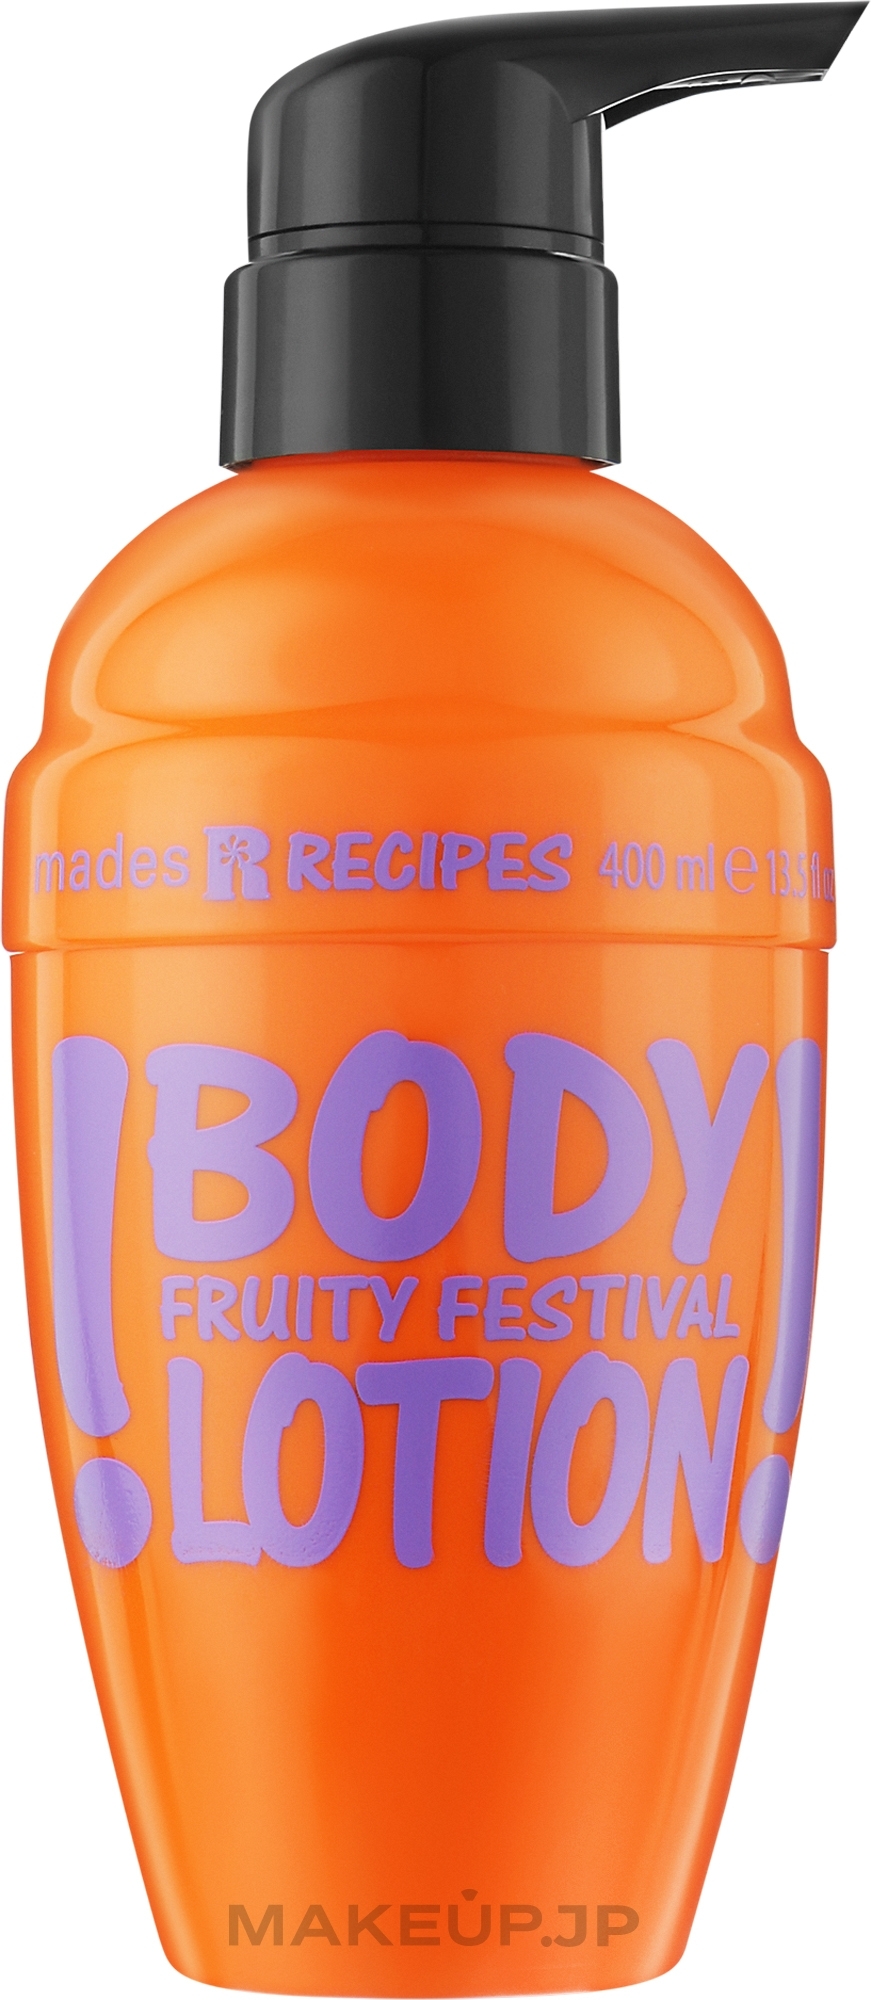 Fruity Festival Body Lotion - Mades Cosmetics Recipes Fruity Festival Body Lotion — photo 350 ml